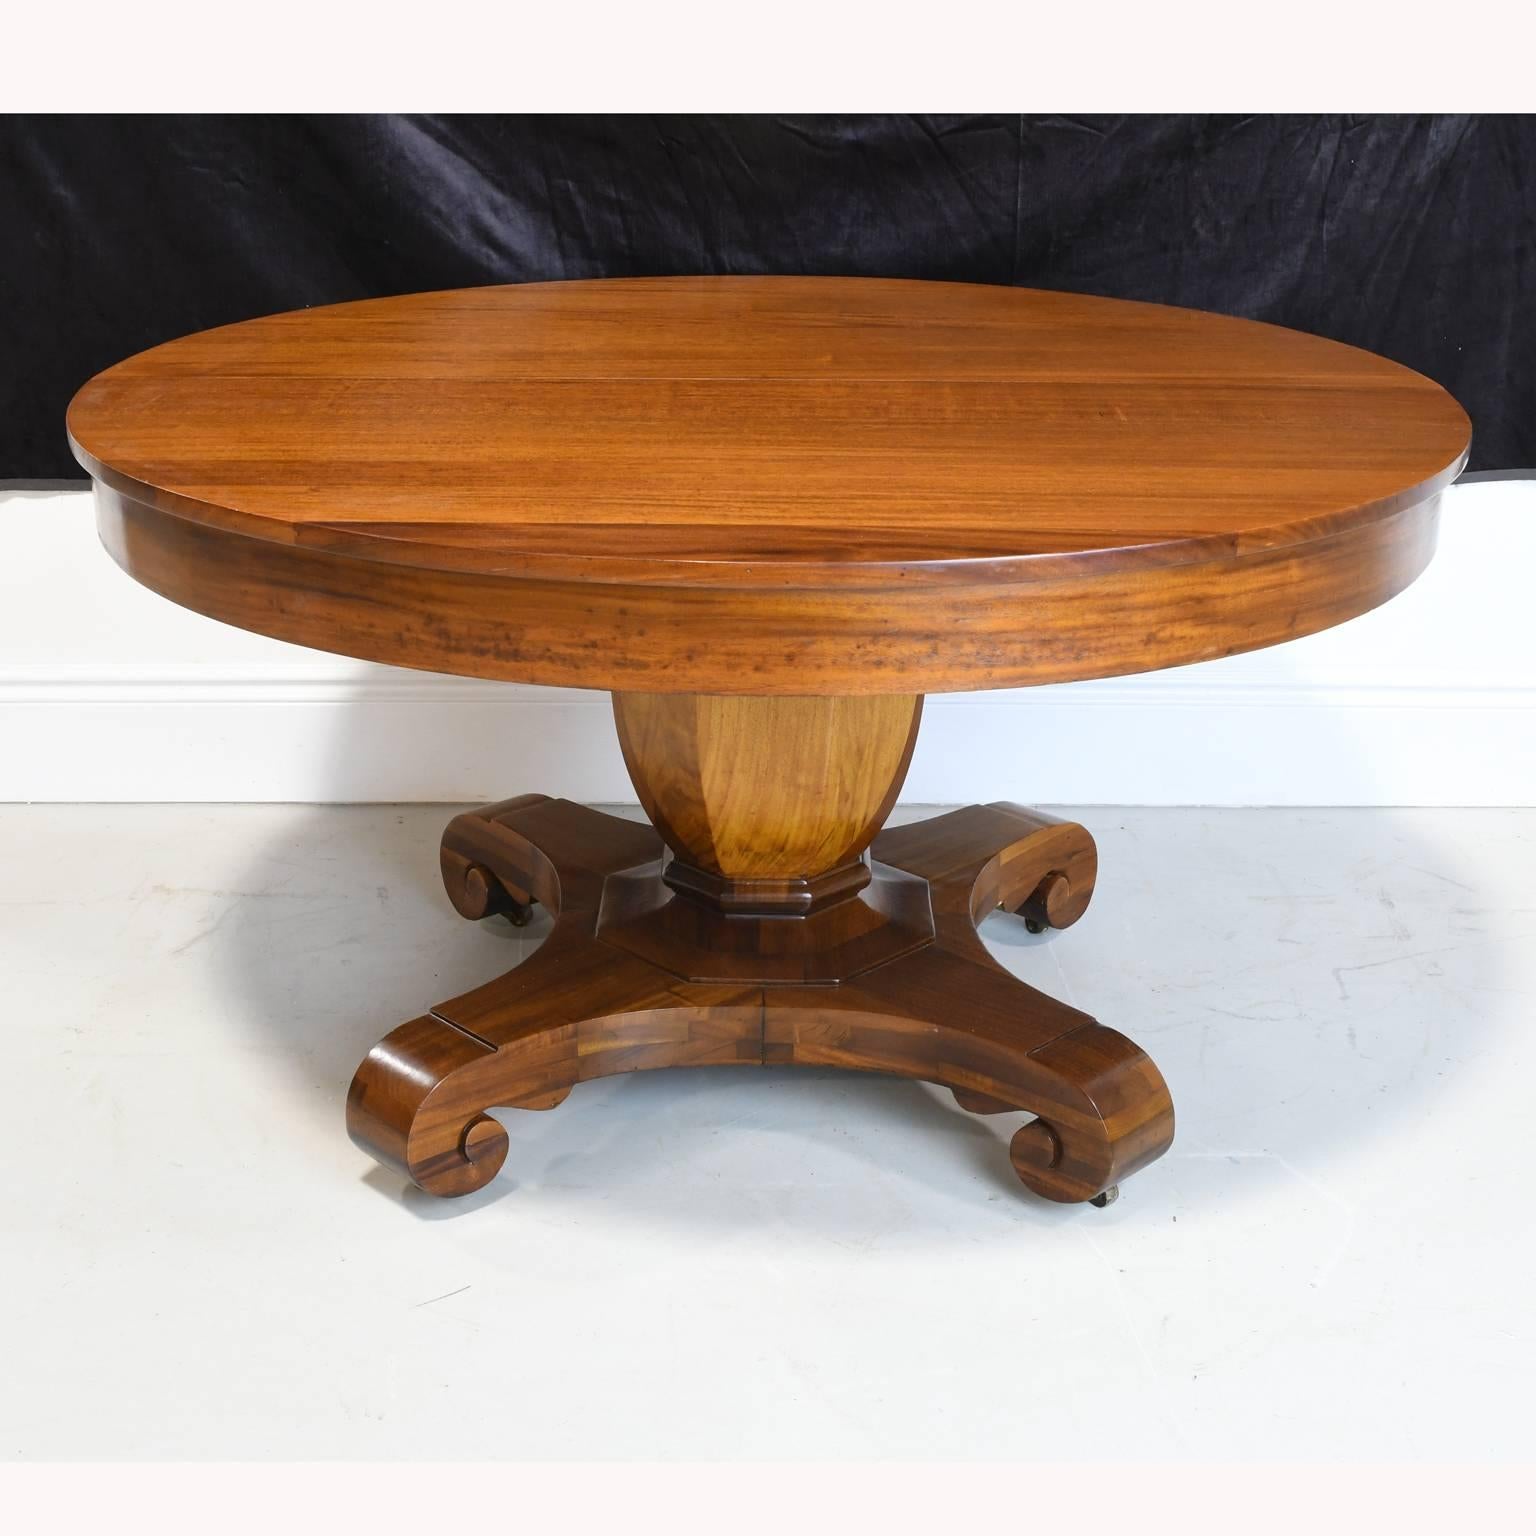 A center pedestal or dining table in mahogany in the Grecian form with round top resting on faceted urn pillar and ending on quatre-form base, American, circa 1880. 

54